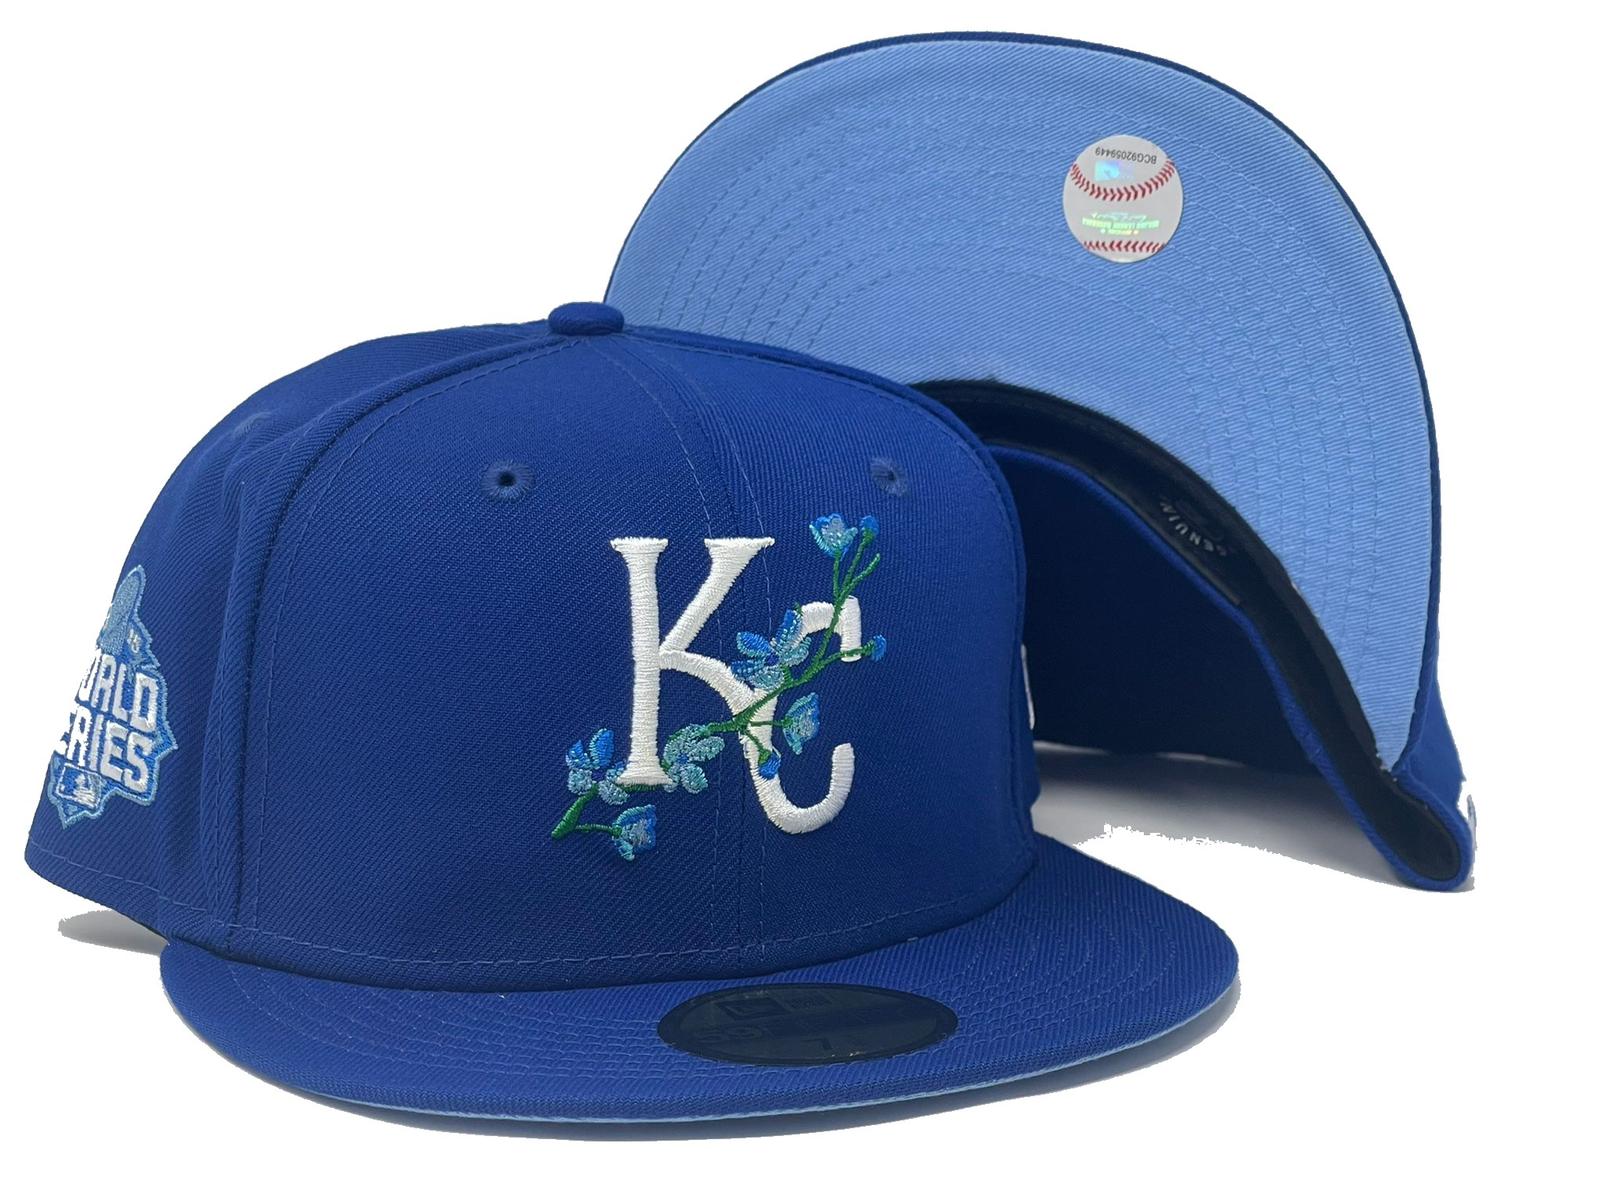 Kansas City Royals All Star Game 2015 New Era Hat Fitted Size 7